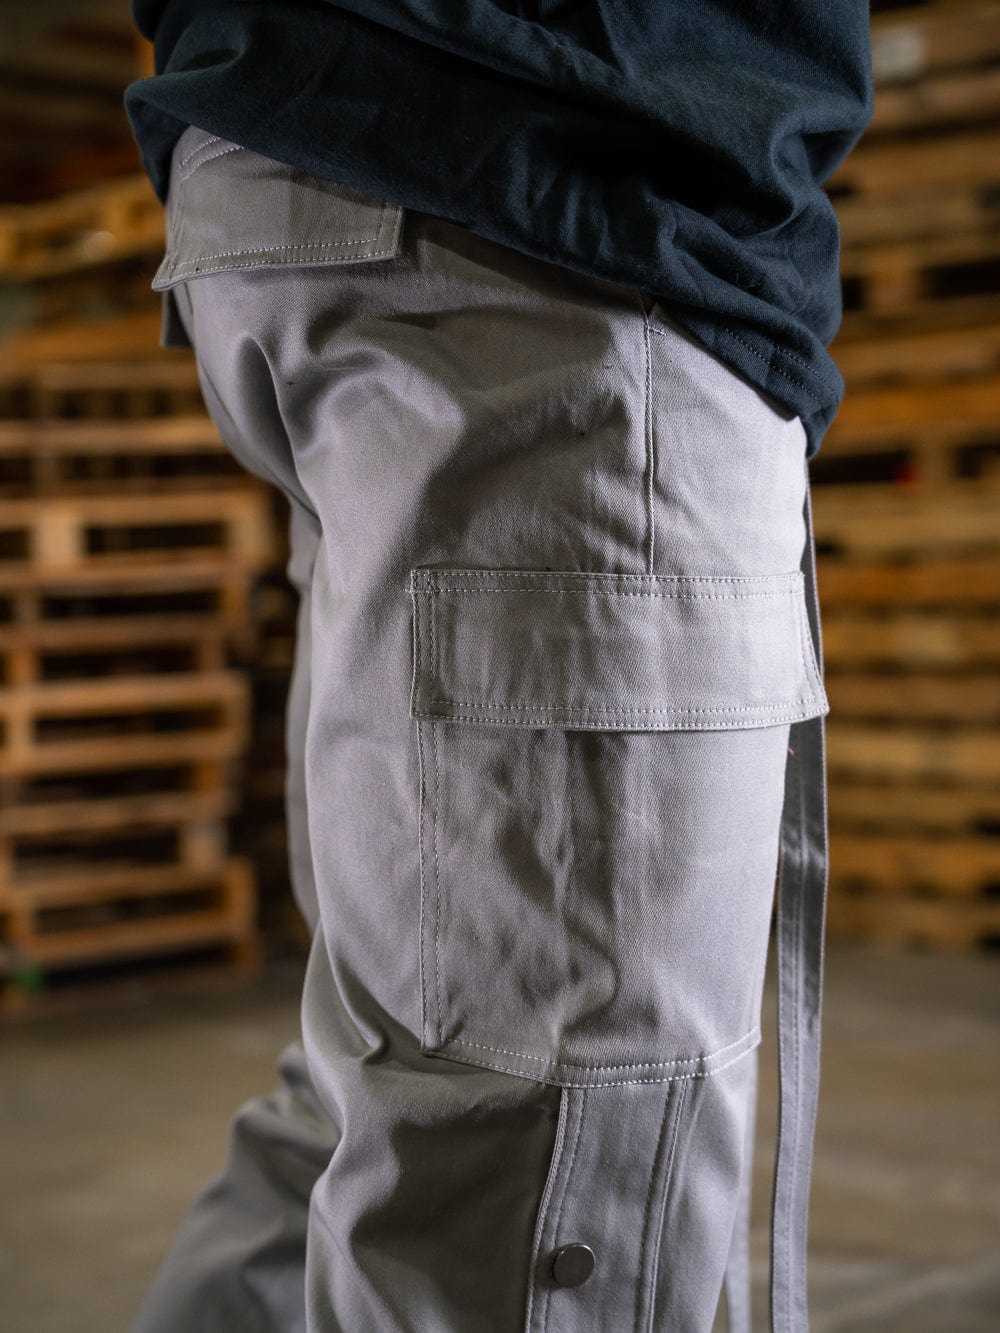 Buy Cargo Pants with Button Closure Online at Best Prices in India   JioMart